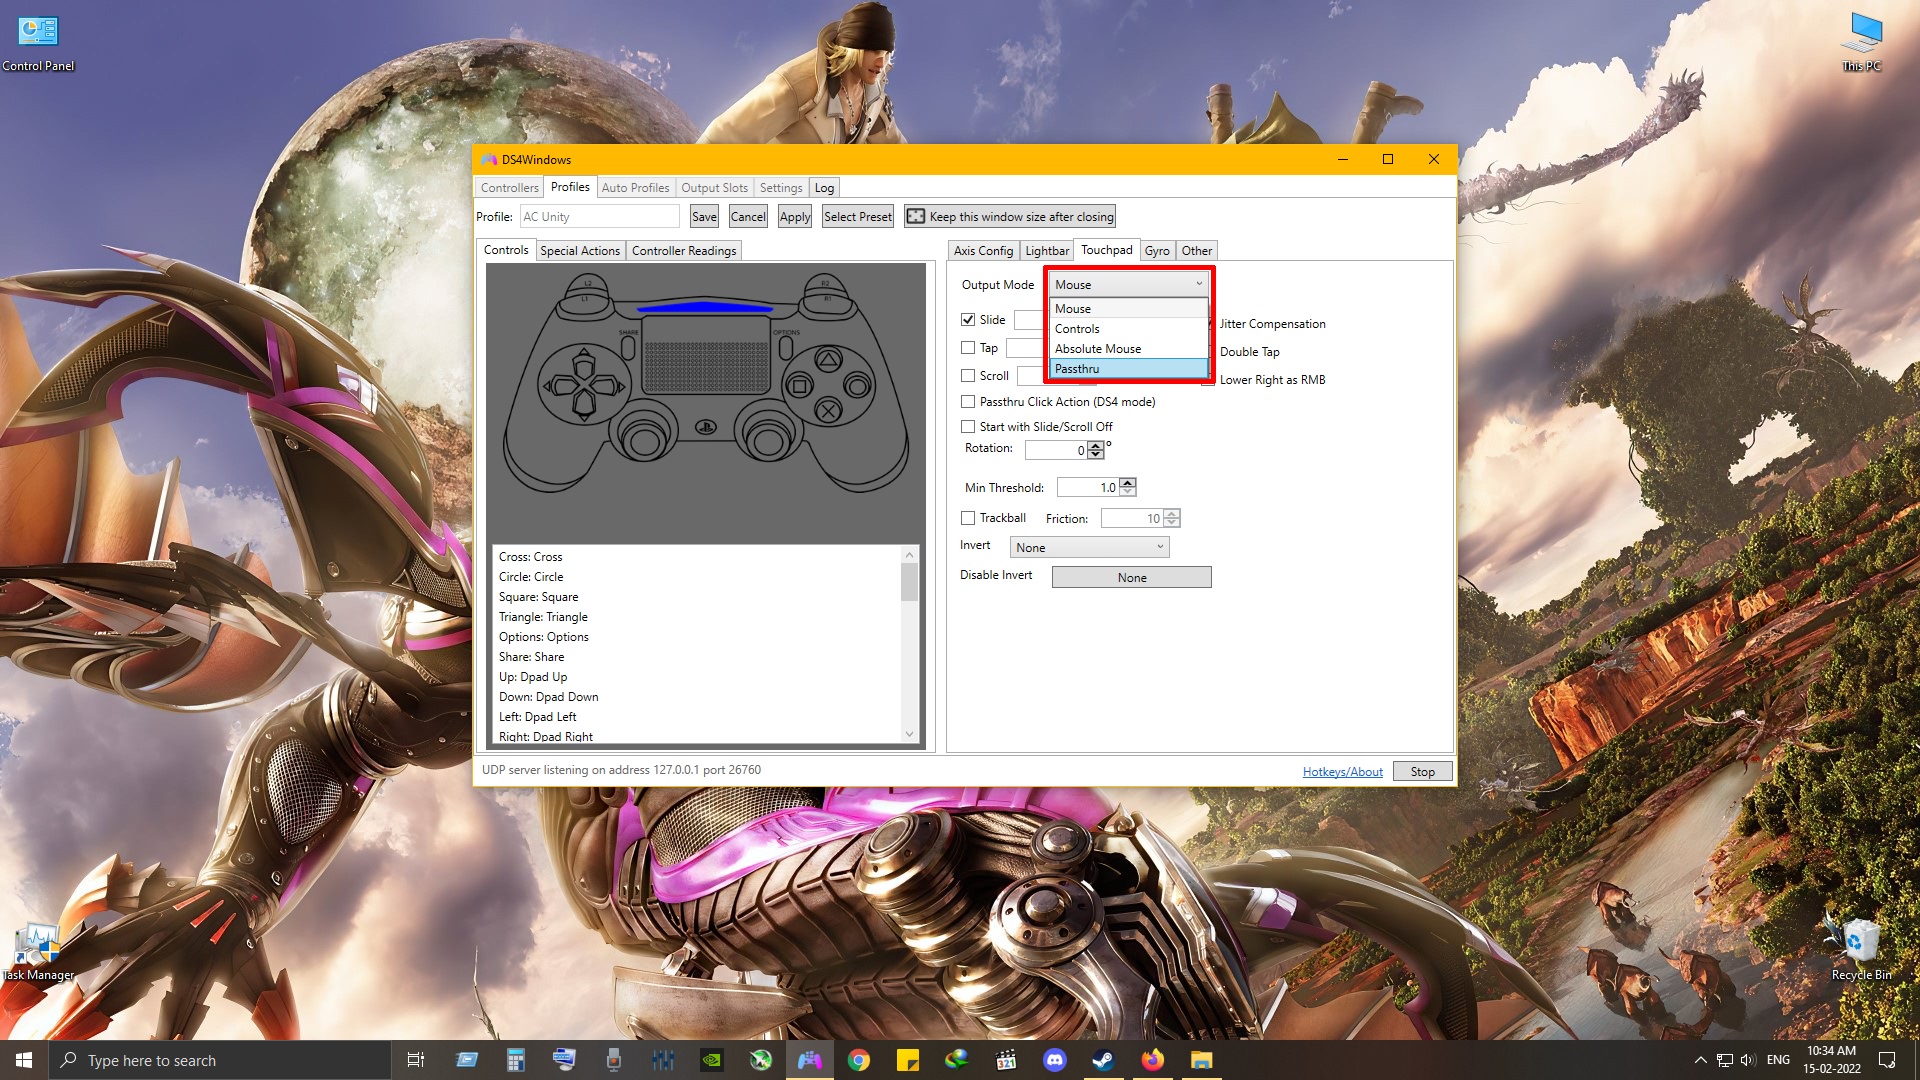 Assassin's Creed Unity Playstation Button Prompts with DS4 v2 Controller - Step 2: Using DS4Windows - 6CF9DA3